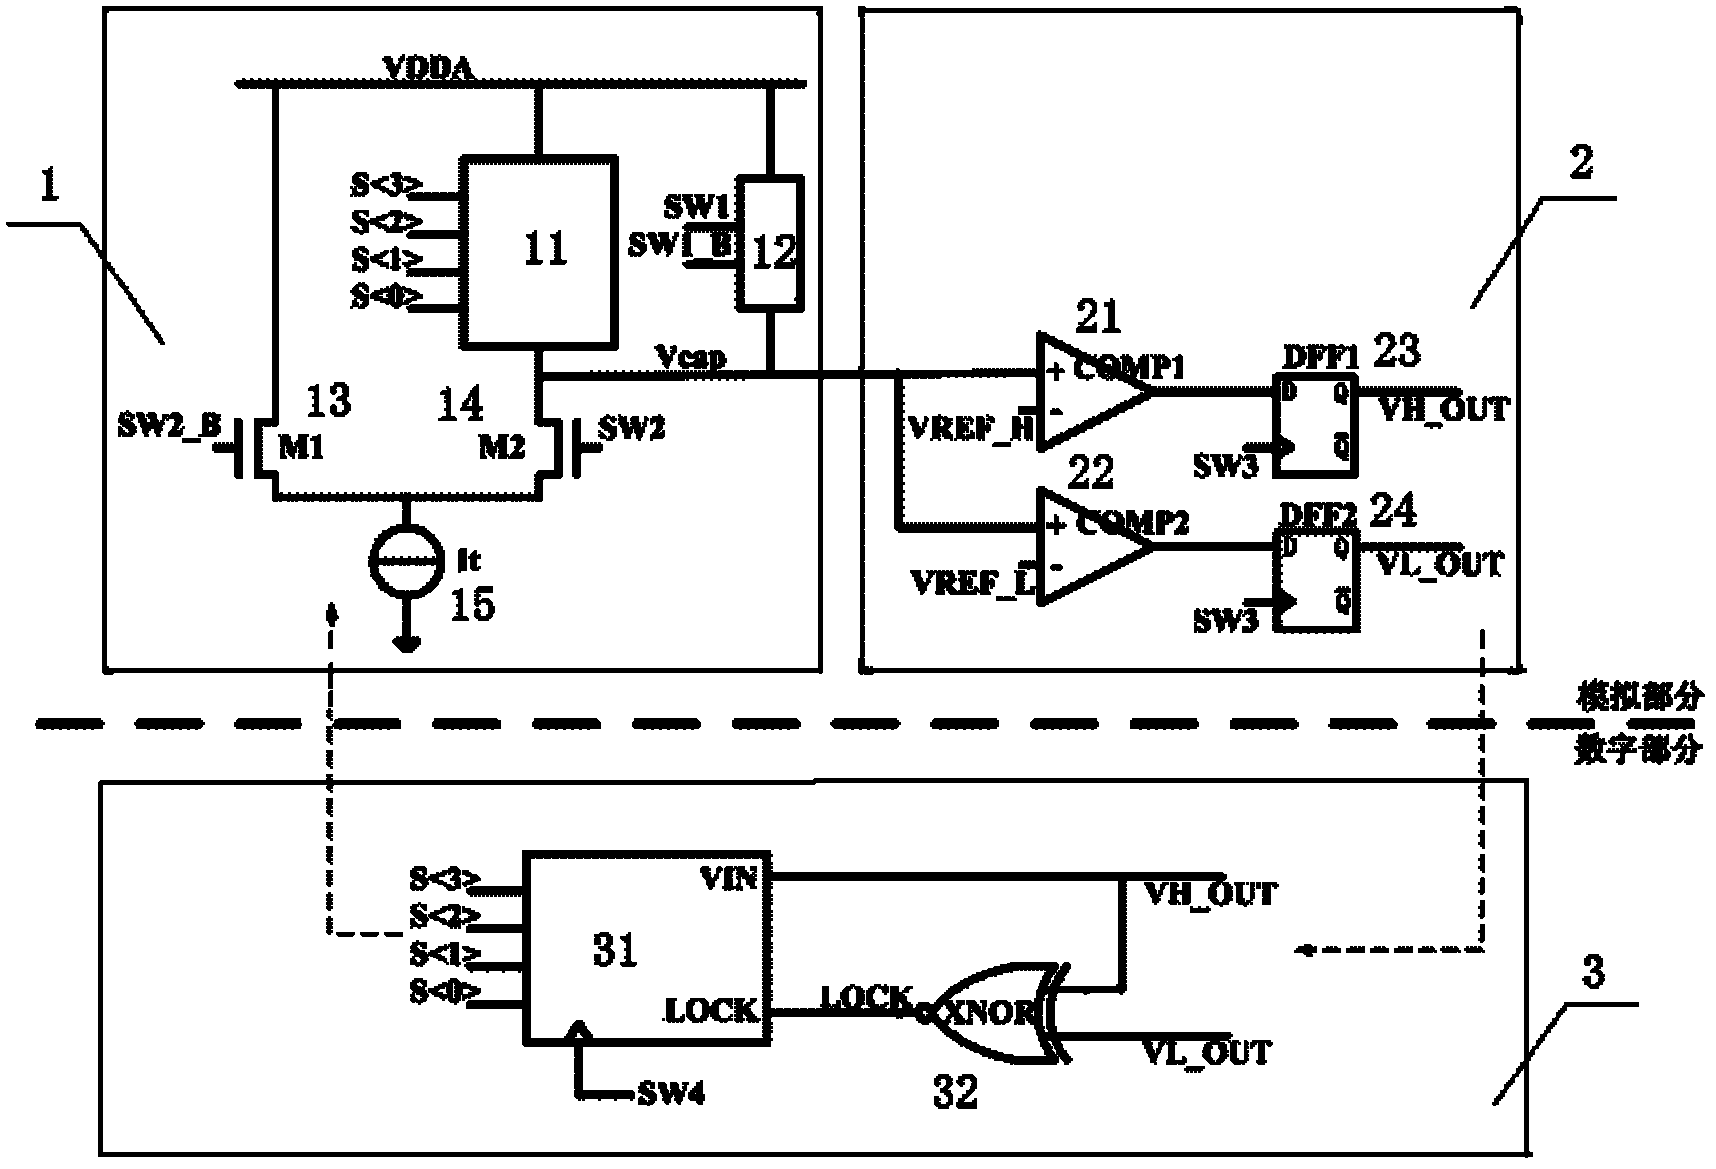 Frequency calibration circuit of active RC (Resistor-Capacitor) filter